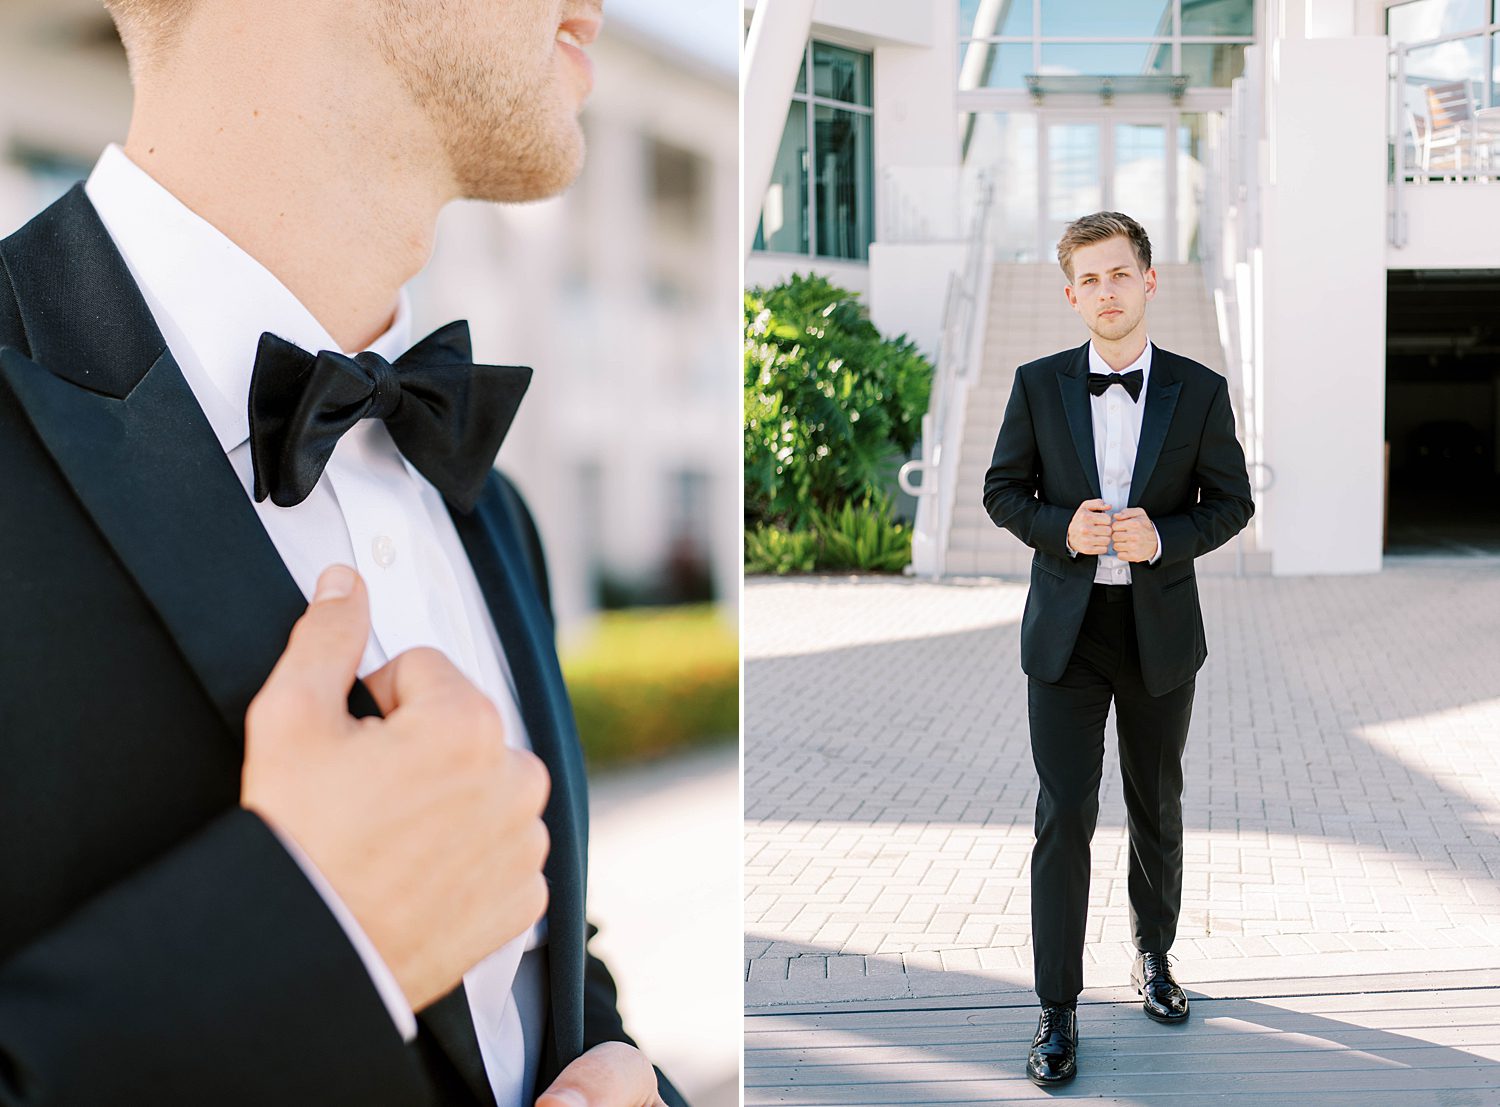 groom stands in classic black suit with bowtie holding lapel